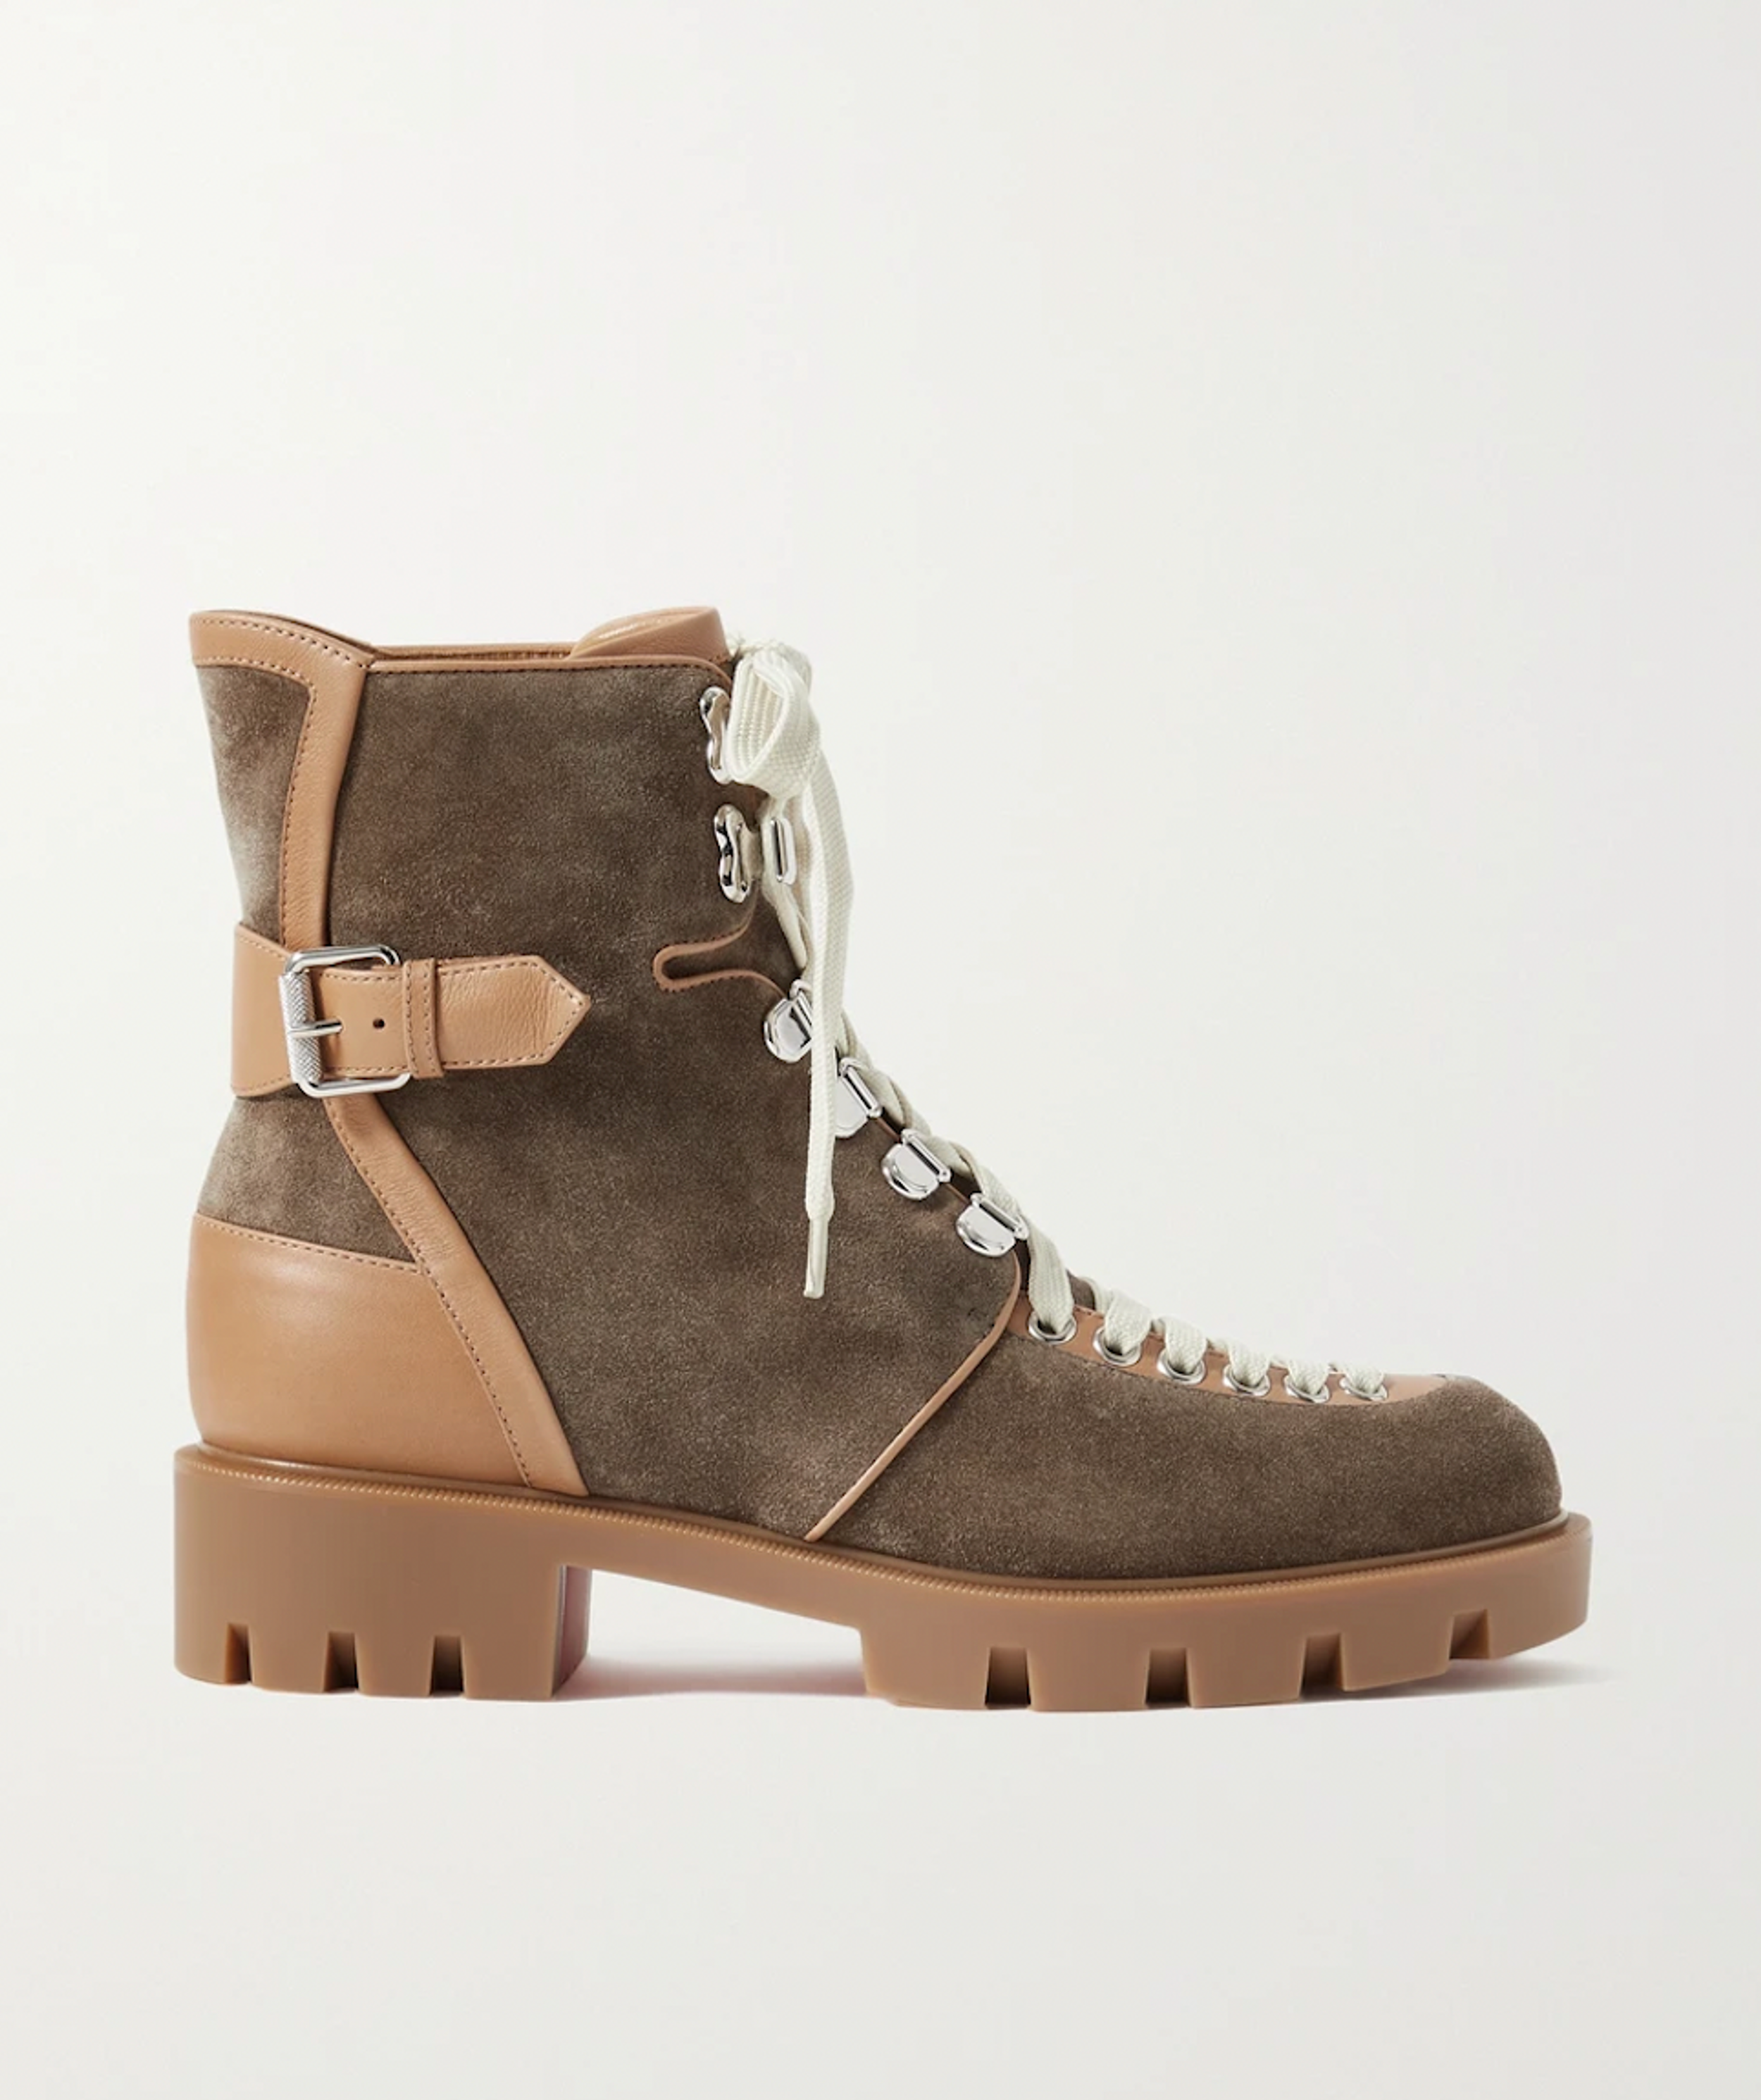 Buckled Leather-Trimmed Suede Ankle Boots